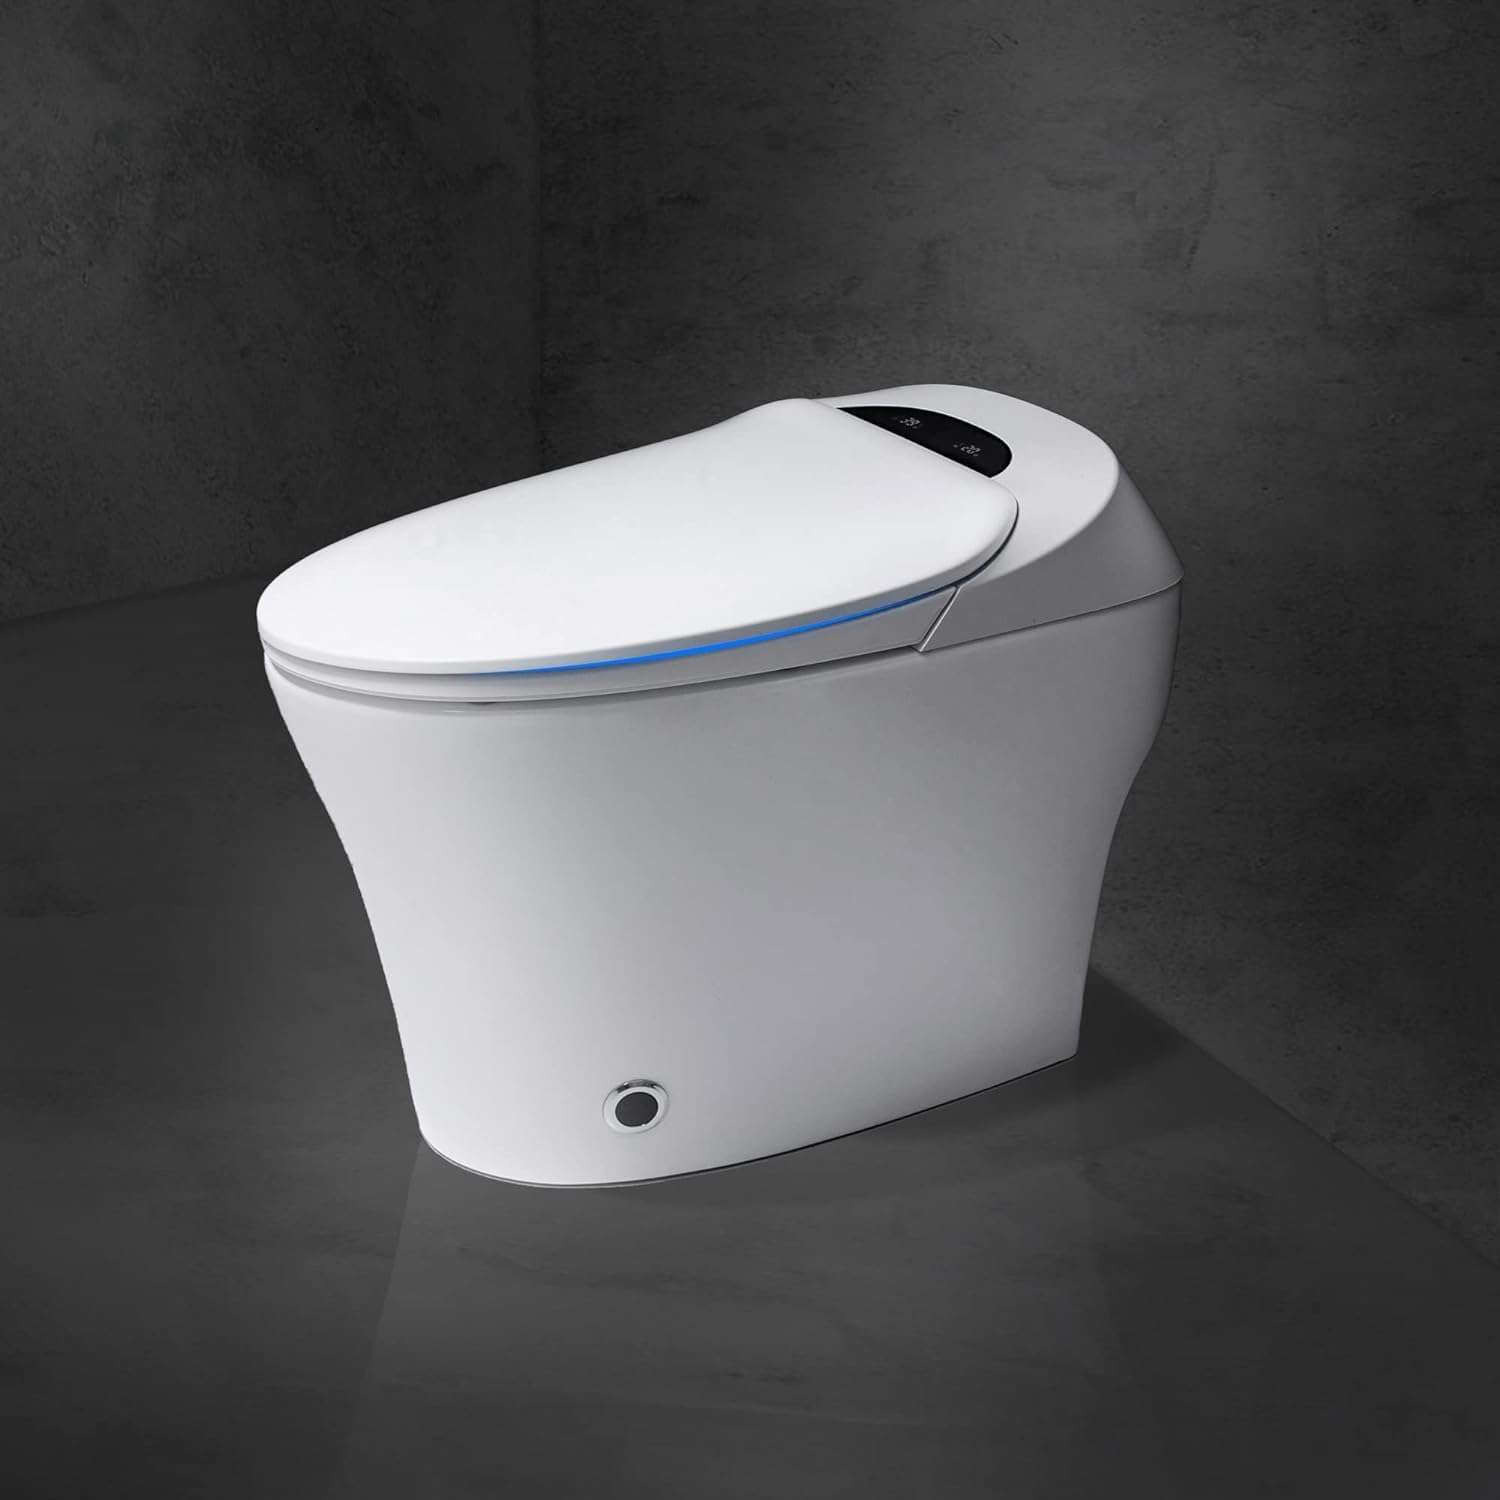 Smart Toilet With Automatic Open/Close Lid HF654-Arrisea